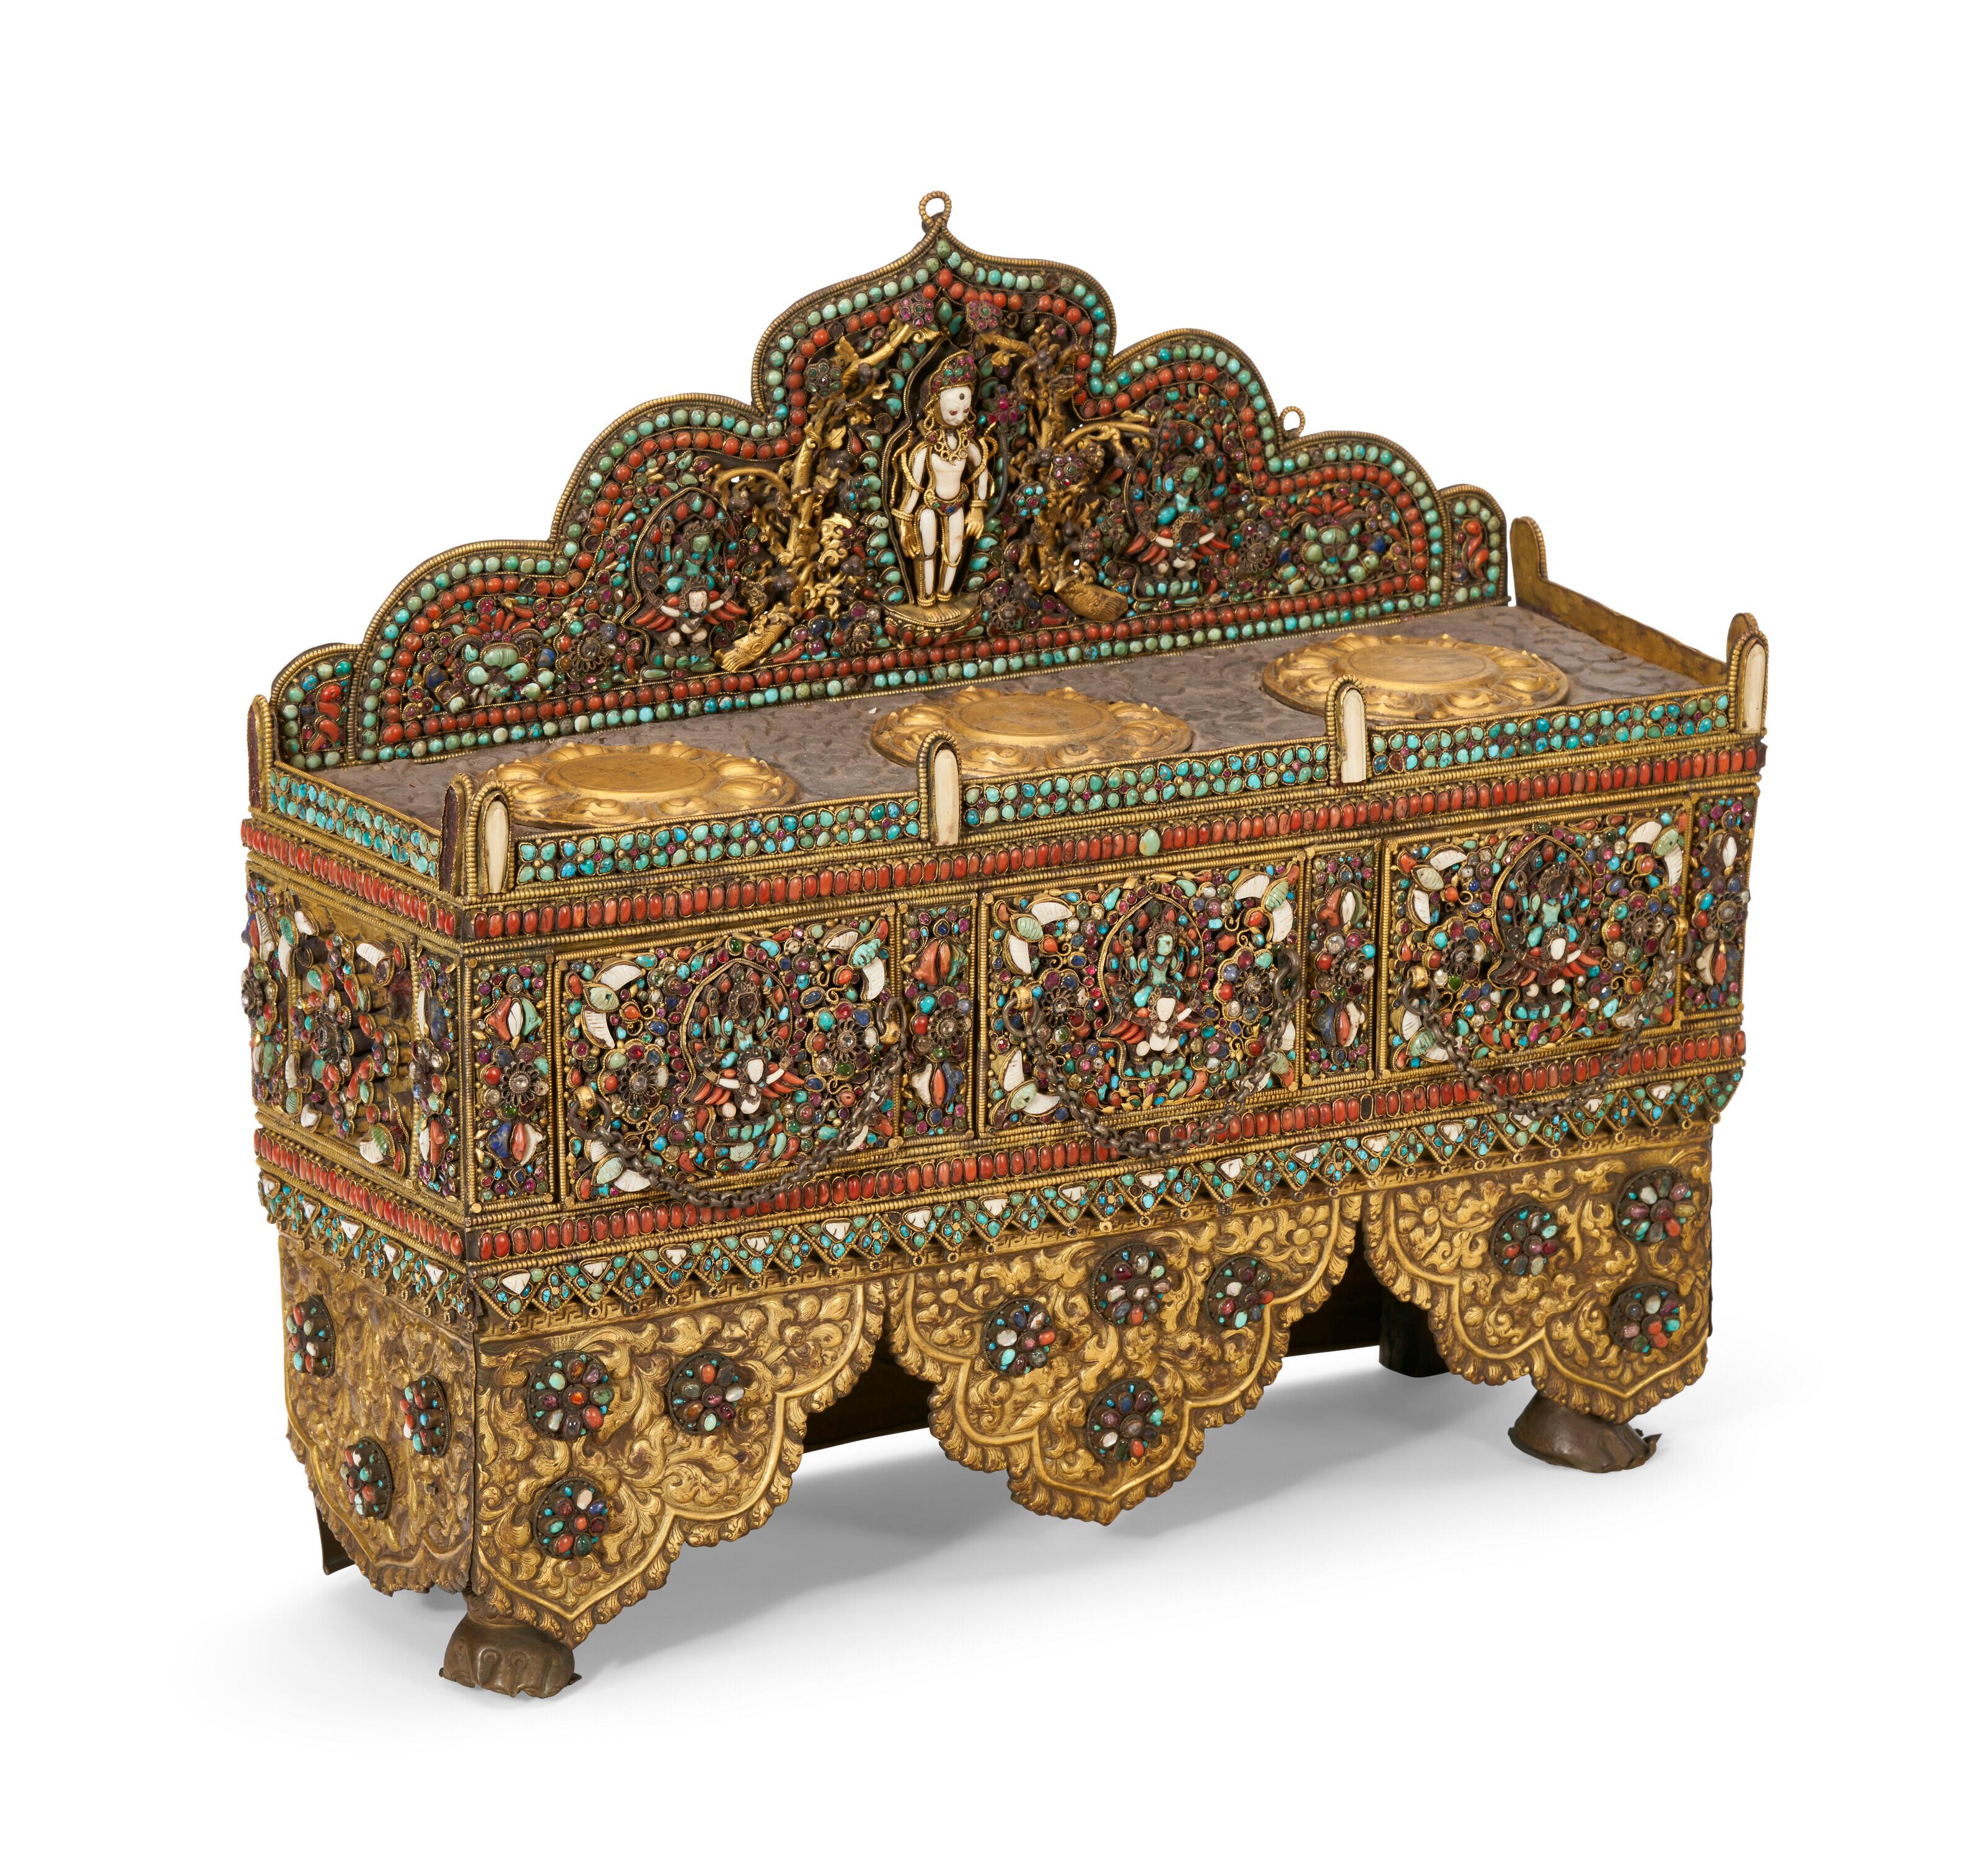 Our beautiful antique Hindu altar from Nepal, circa 18th/19th century, is crafted from silver and gilt copper and repousse designs and inlaid with hundreds of stones. It has three drawers and a backplate depicting the god, Vishnu on his mount,